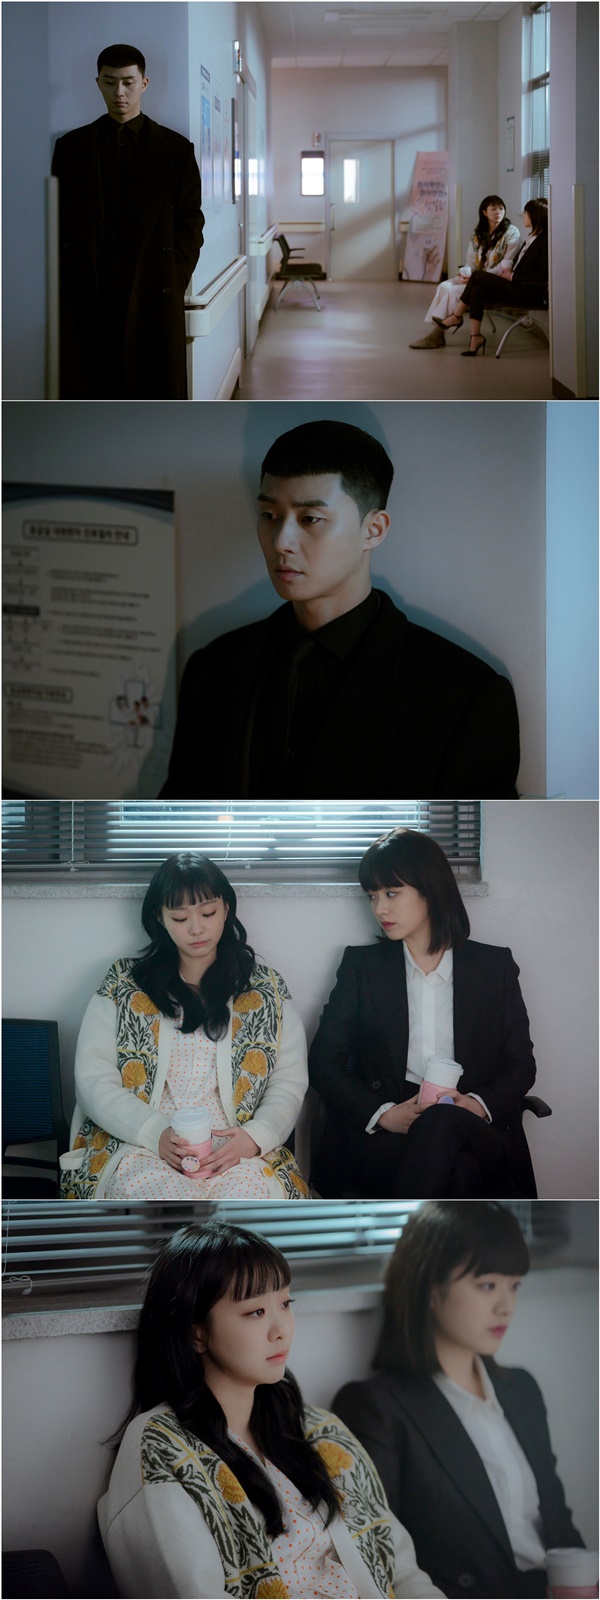 The awakening of Itaewon Clath Park Seo-joon begins.JTBCs Drama Itaewon Klath (playplayed by Cho Kwang-jin and directed by Kim Sung-yoon) amplified the thrilling index by revealing the appearance of Park Seo-joon, who listens to the conversation between Joy Seo (Kim Dae-mi) and Ma Hyun-yi (Lee Joo-young) at a distance on the 14th, ahead of the 14th broadcast.In the last broadcast, four years have passed and the hot rebellion of the current-style Roy has been drawn.The single night, which grew from Itaewons small fortifications to Inc. I.C., was now closely following the peak of the catering industry.But even before the final counterattack, when Jang Dae-hee (Yoo Jae-myung) found out that he had been sentenced to cancer, Park said, You should be punished by me.Dont die yet, he said, pledging his last revenge. The cool eyes of Park and Chang, who were promising to reunite soon, gave overwhelming tension.The pity between Roy and Joy in the photo, which is released, stimulates curiosity, and Joy and Marhyeon, who are more emaciated than before, are talking in the hospital hallway.The eyes of Roy, who hears the stories of two people from a distance, are very different.In the previous preview, Joys Confessions, I have to be the person I need for you, raises the expectation by hinting at the awakening and change of Roy, who is confused by the feelings toward her.It is noteworthy whether Joys four-year unrequited love can lead to bilateral romance.In the 14th episode, which airs on the 14th, Joys straight line continues.The heart of Joy, who I love you Confessions, begins to permeate slowly and deeply to Roy.Meanwhile, Joy, who was overly clinging to the work of Inc. I.C to become a necessary person to Roy, falls overworked.The awakening of the late-recognizing Park will be drawn together, and I am looking forward to seeing if the hearts of the two people who have been mixed for a long time can finally reach out.The stone-like mind of Roy, who was not stuck in Joys long-standing crush and straight-line Confessions, begins to move slowly, said the production team of Itaewon Klath. I hope that the moment of changing and awakening will add to the excitement of facing my heart.On the other hand, Itaewon Clath 14th will be broadcast on JTBC at 10:50 pm on the 14th.